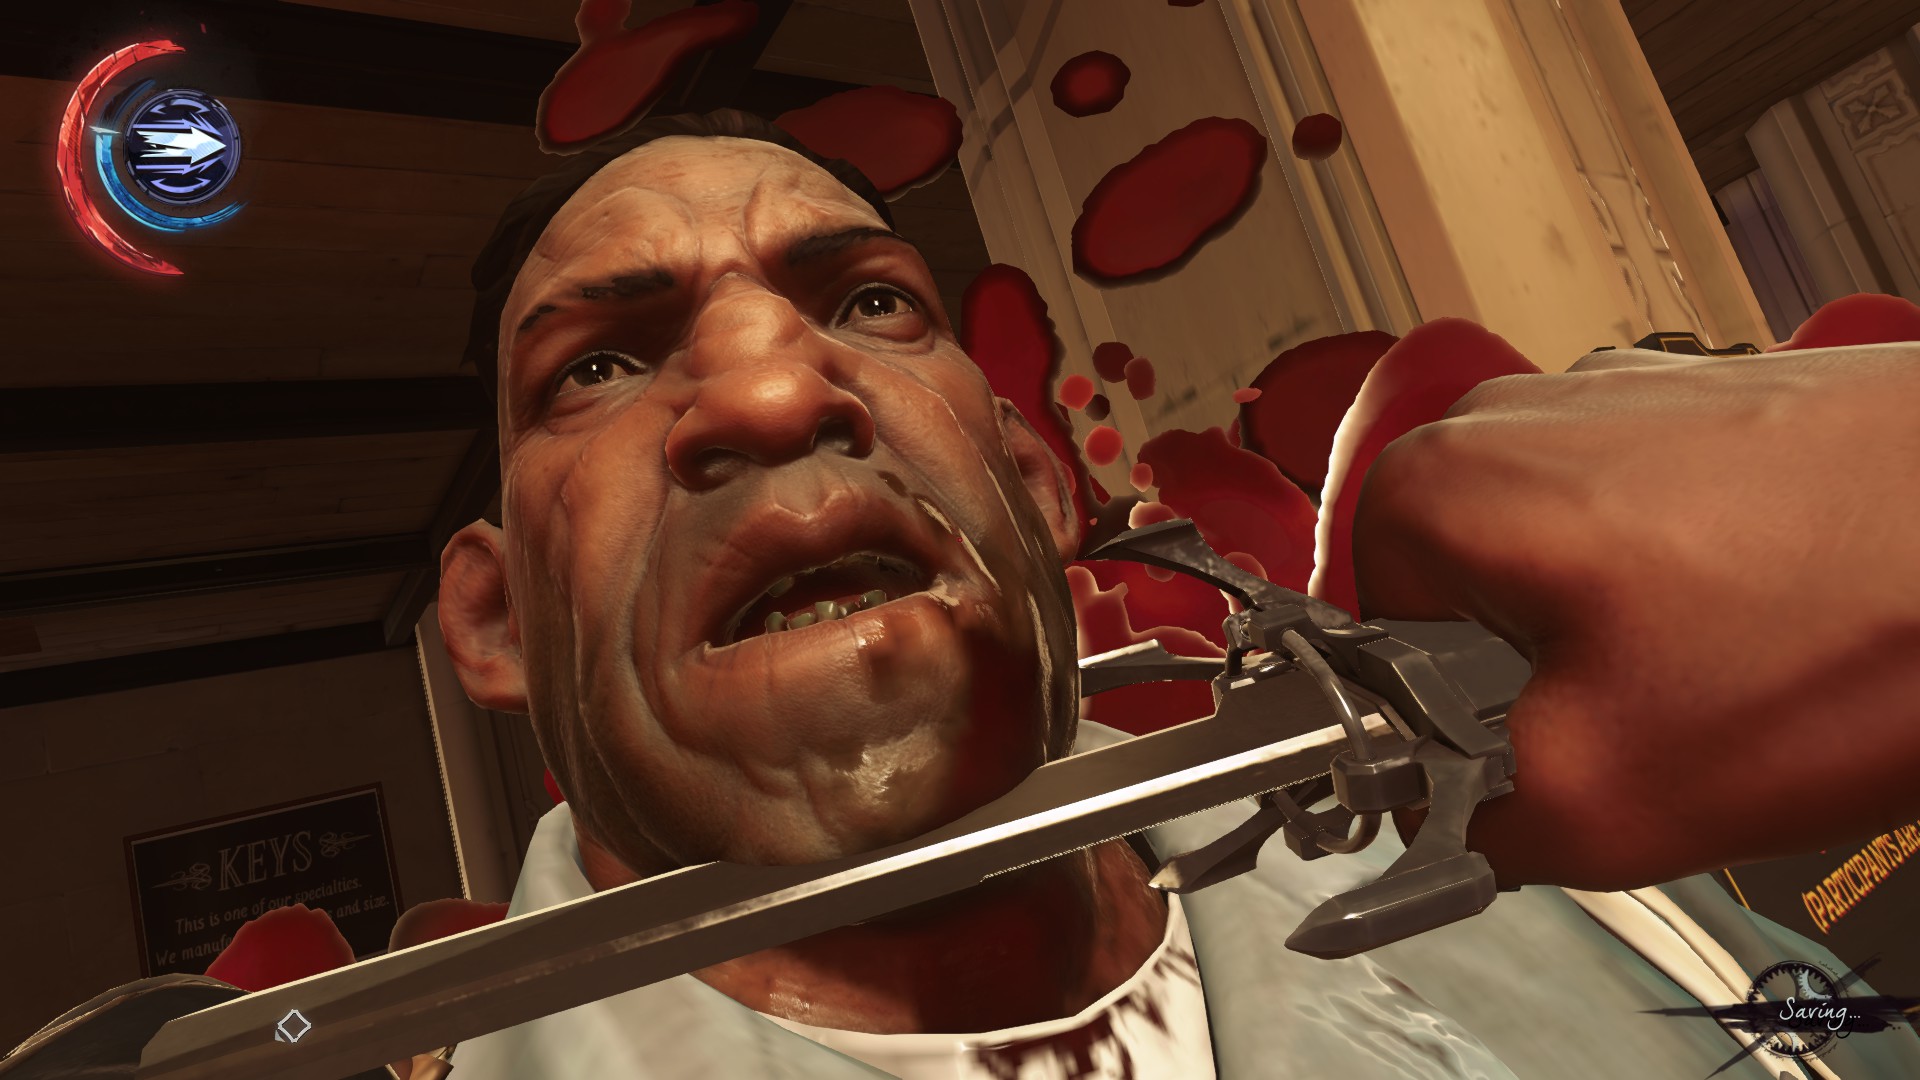 An assassination in Dishonored